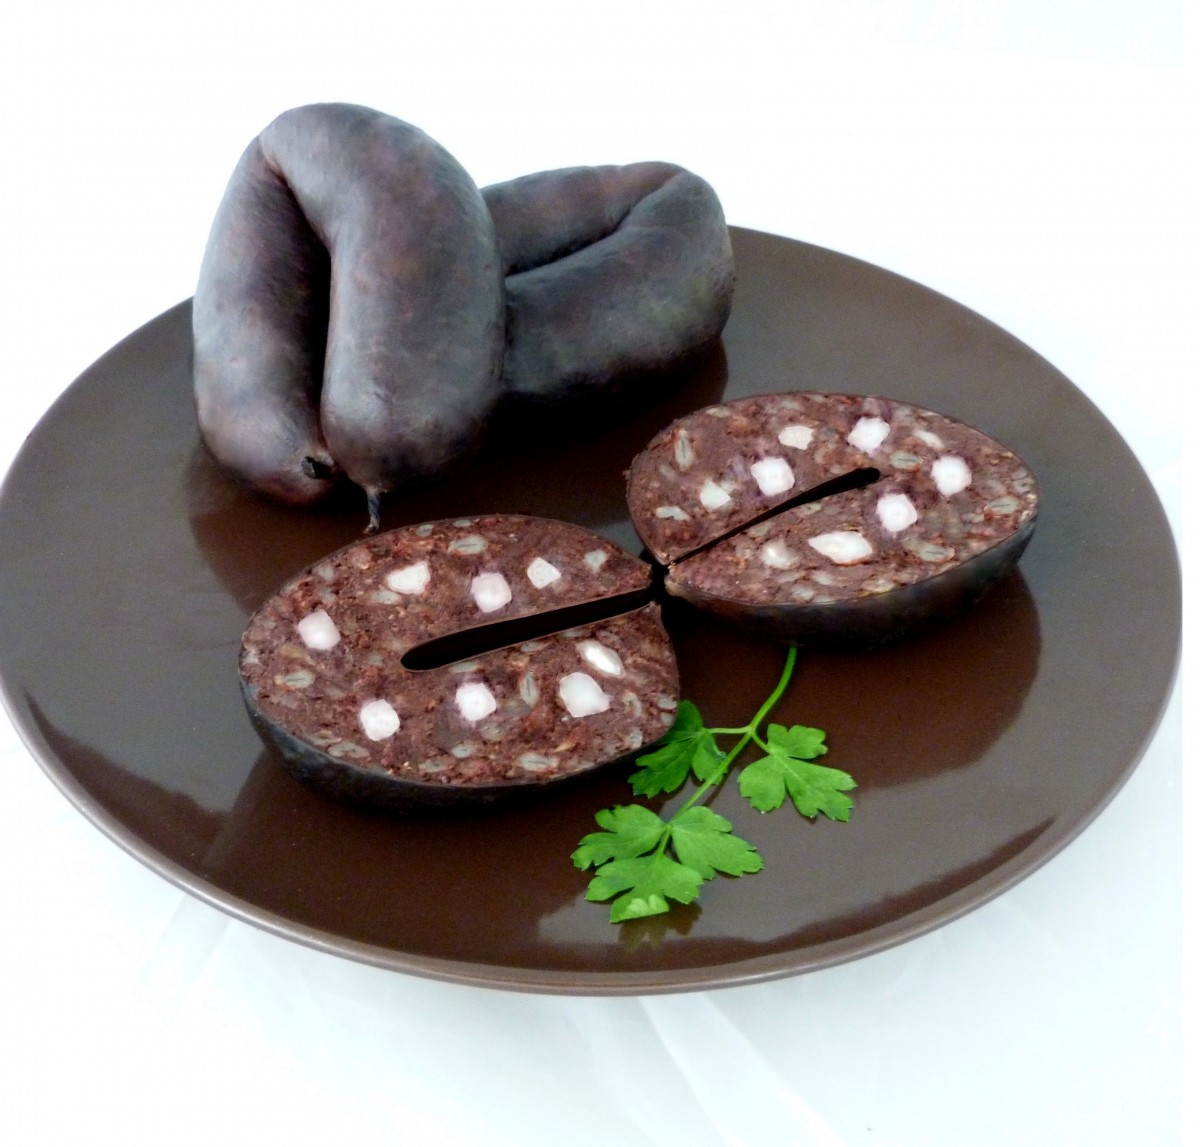 Traditional Horseshoe Black Pudding, Best Black Pudding in Britain, Recipe dating back to 1879